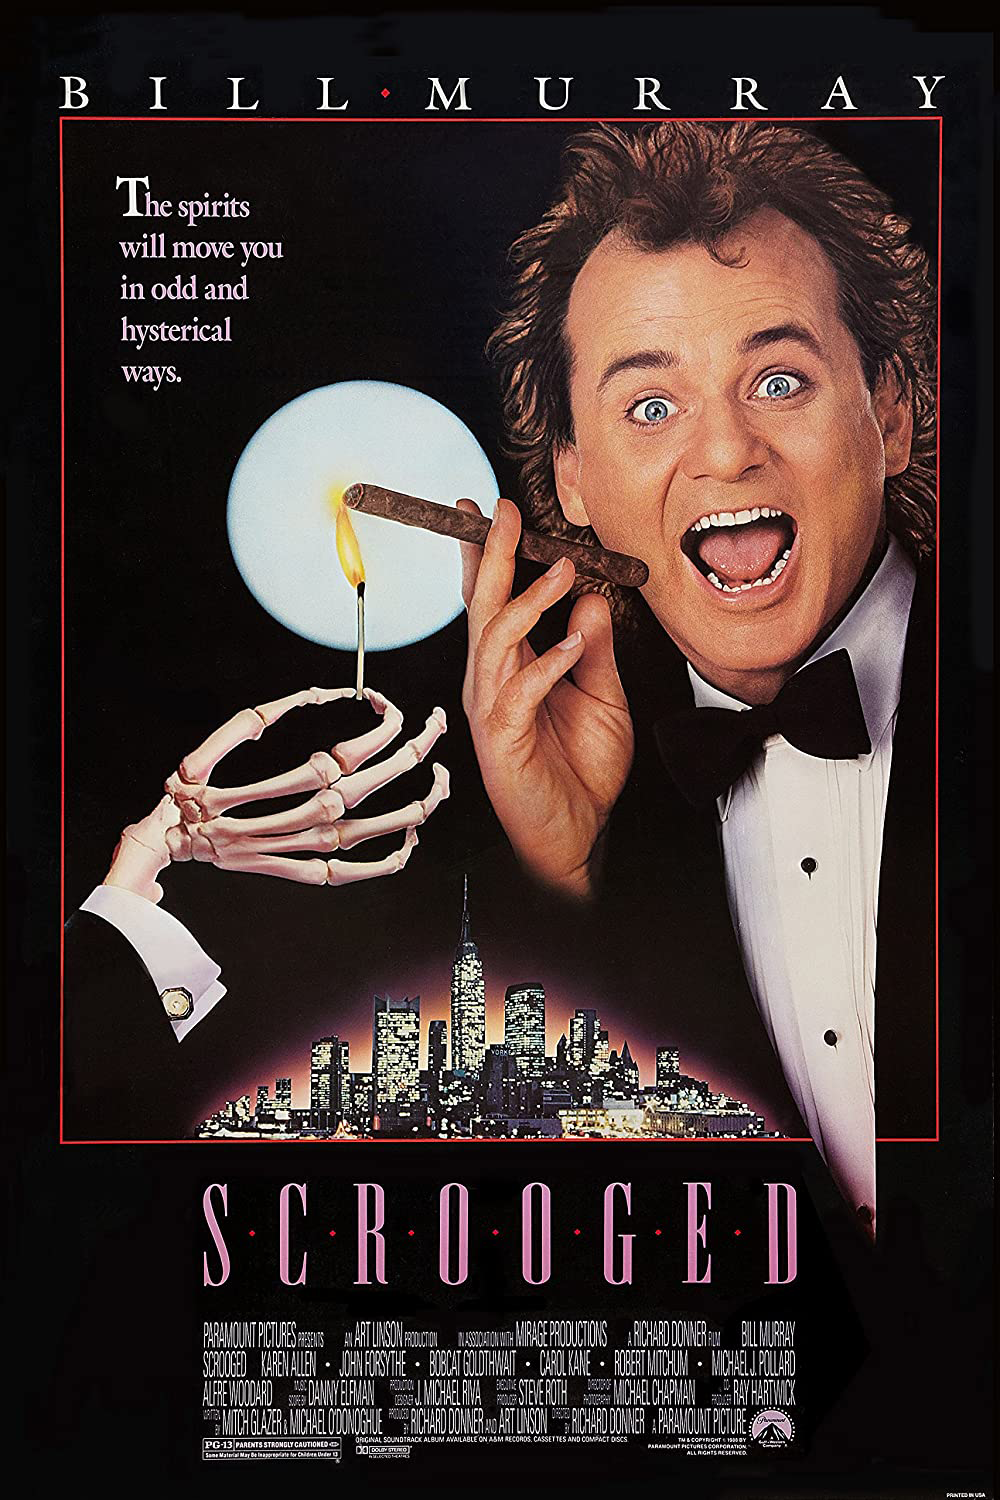 Danny Elfman #45 Scrooged (8x10 and 11x17)